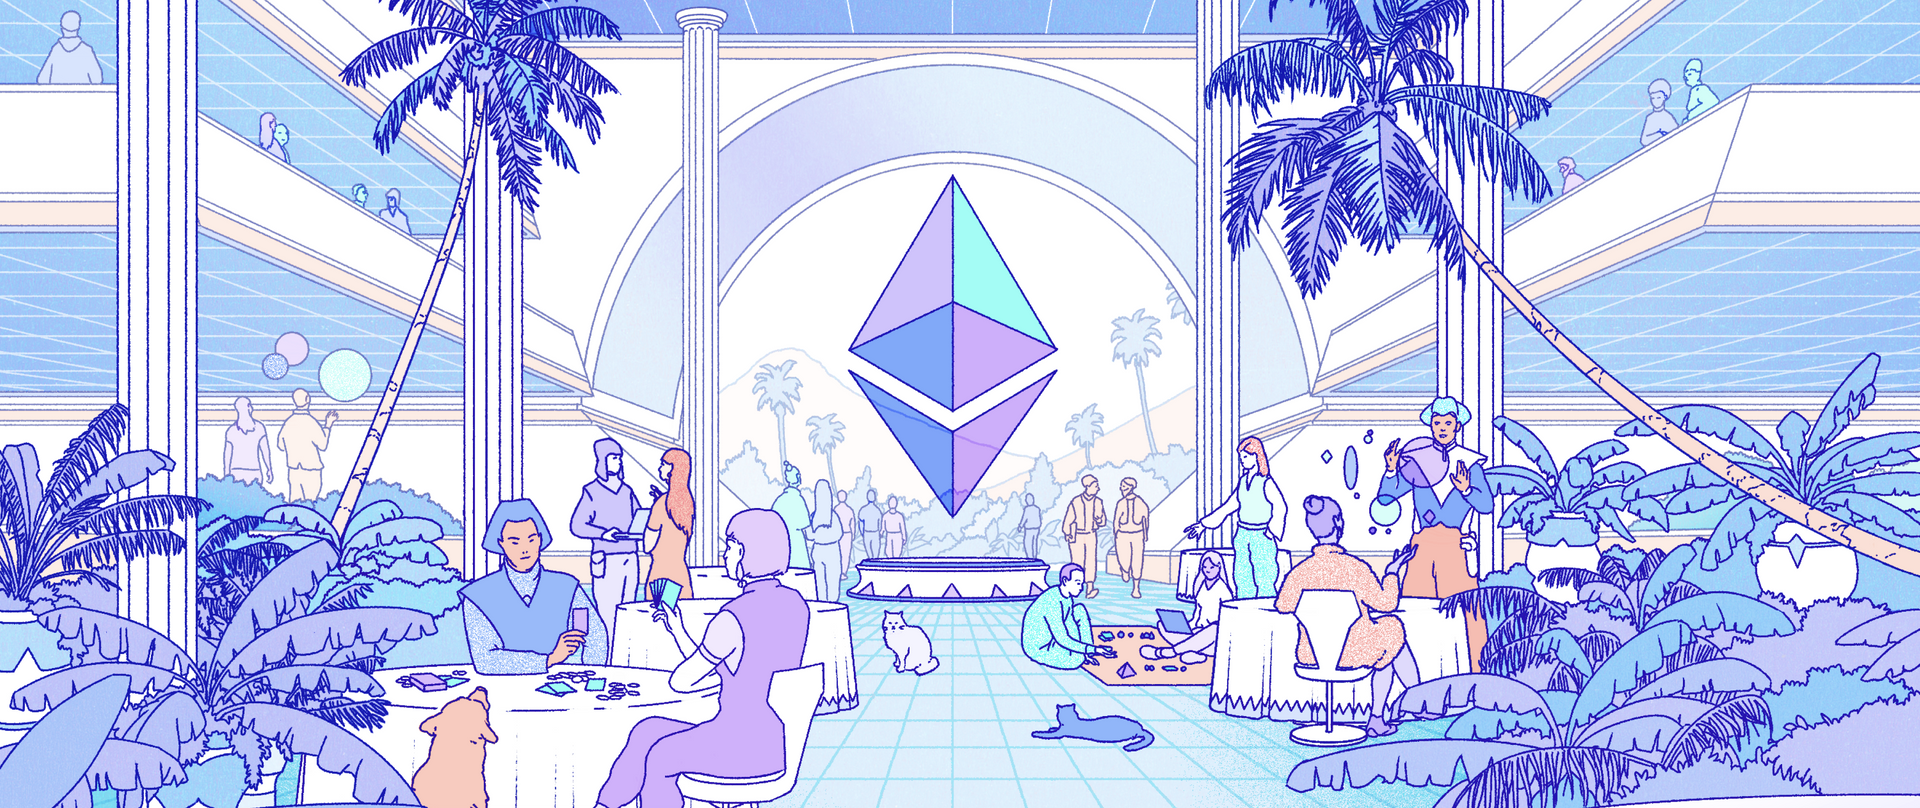 An illustration of characters in a social space dedicated to Ethereum with a large ETH logo